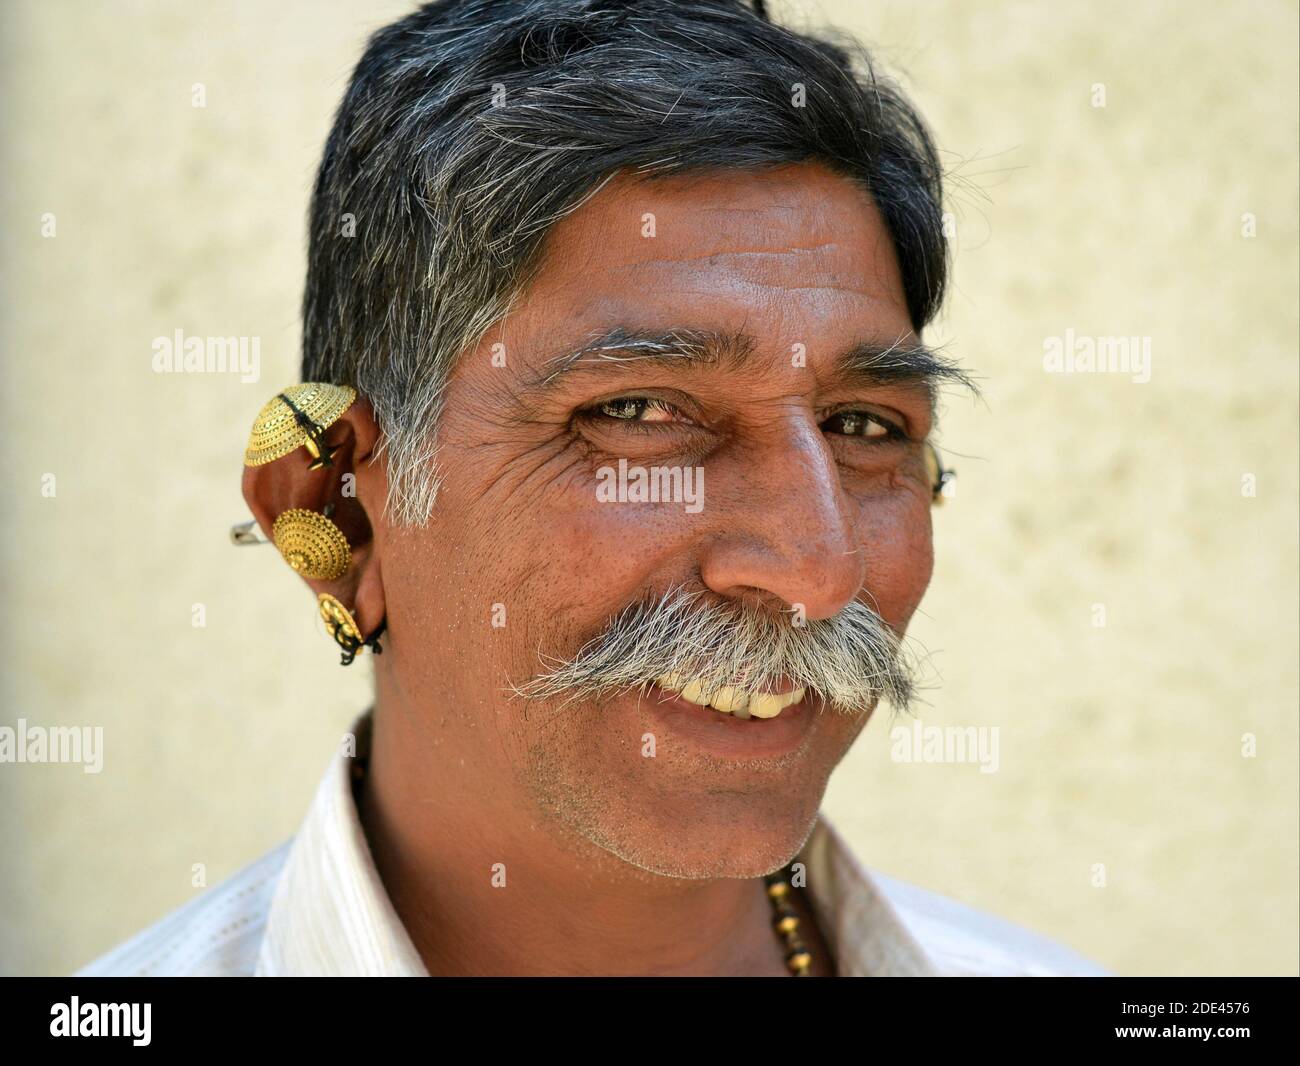 Middle-aged positive cheerful Indian Gujarati man with grey moustache and elaborate gold ear jewelry (ear lobe and ear helix) smiles for the camera. Stock Photo